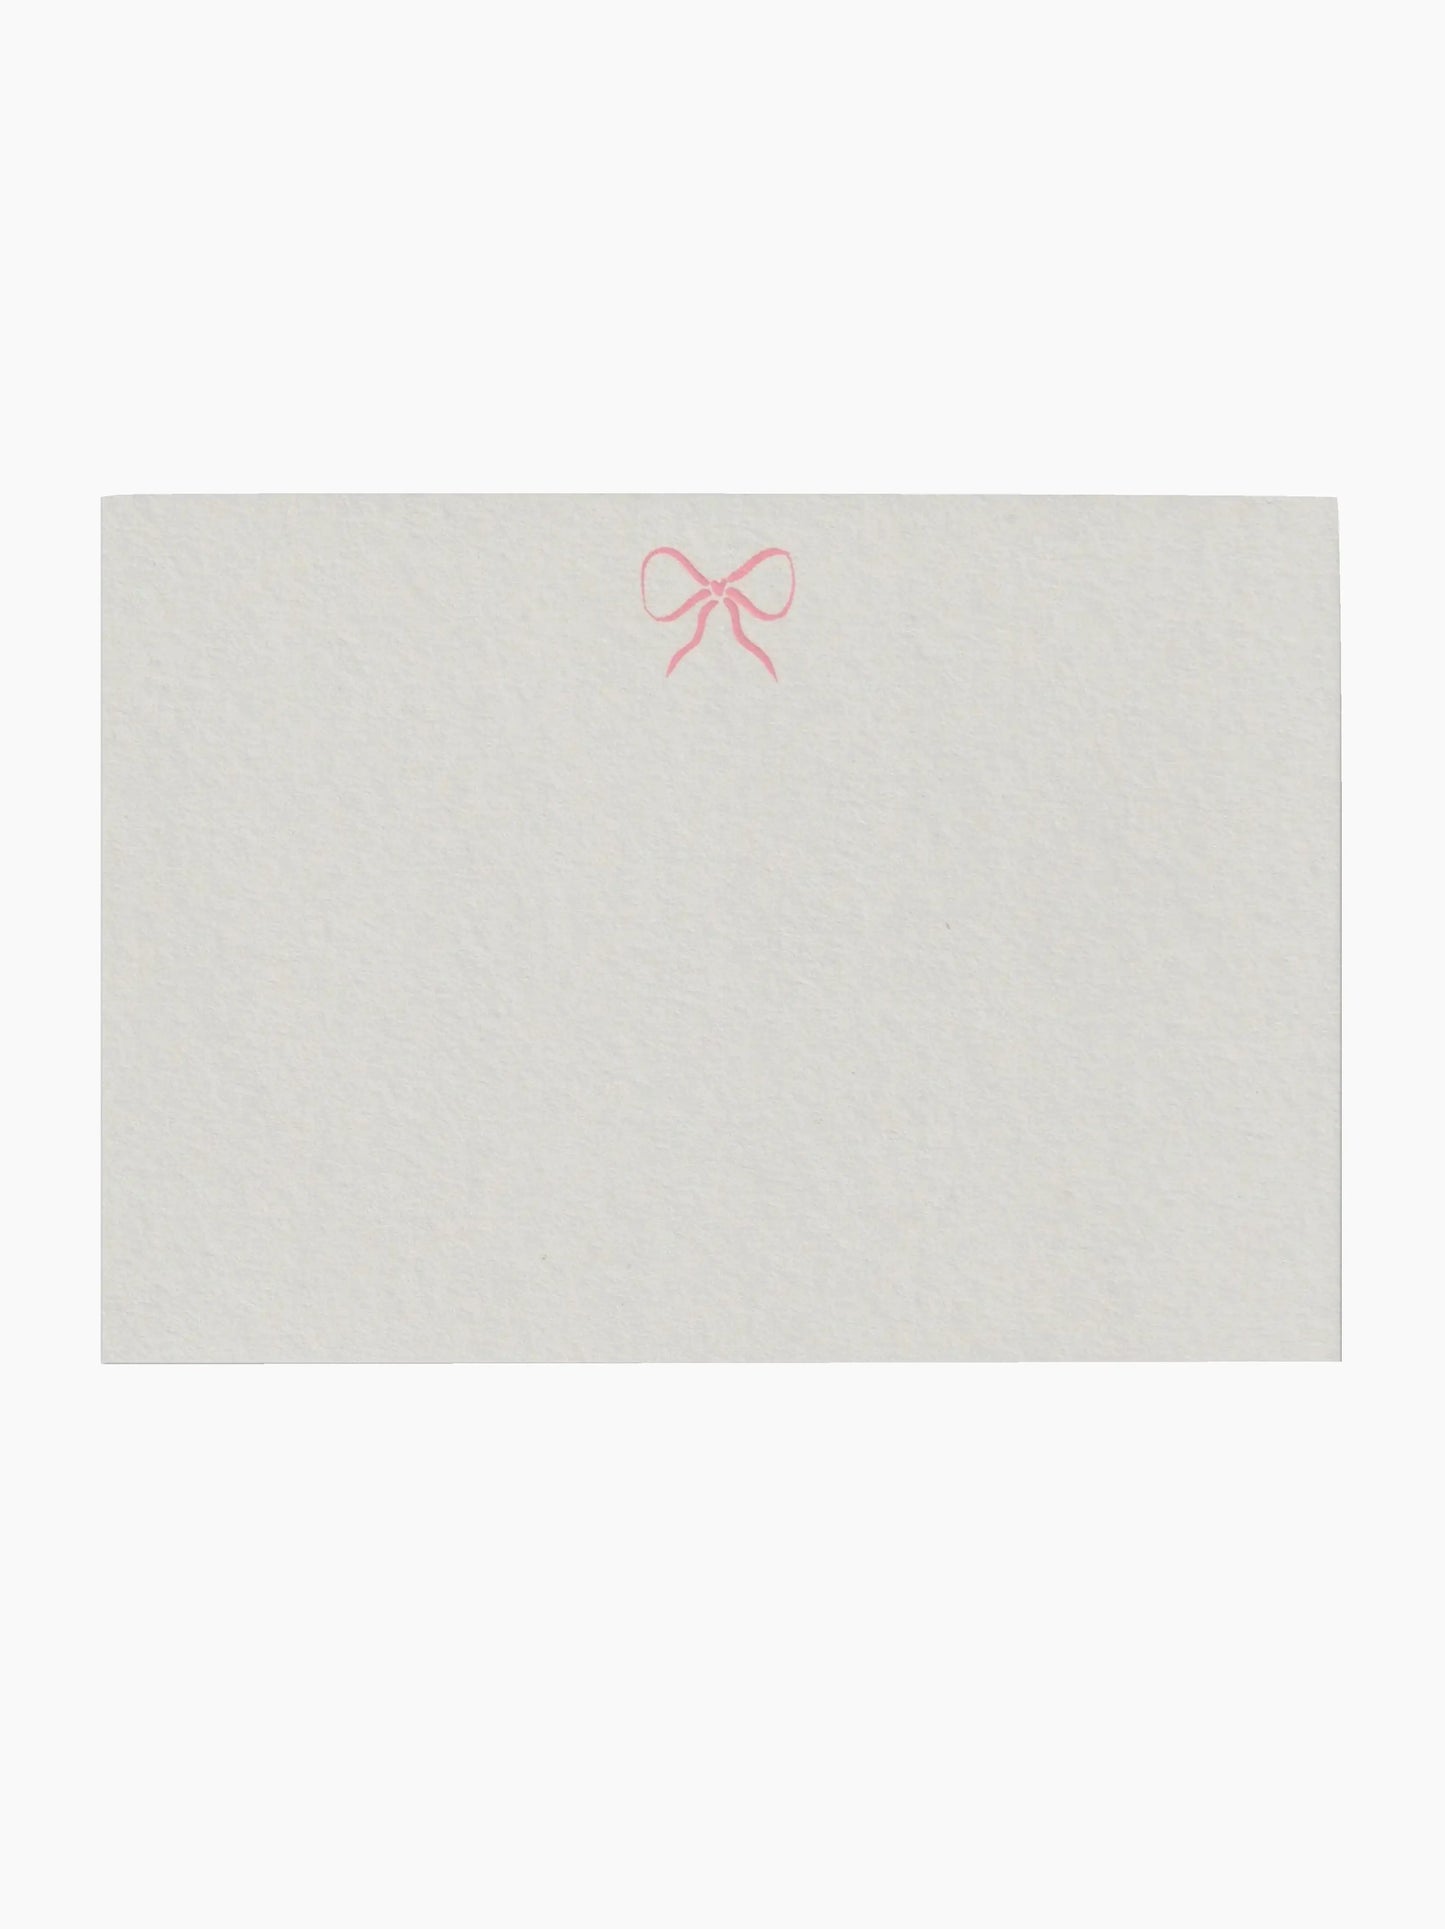 Dove Bow Note Cards